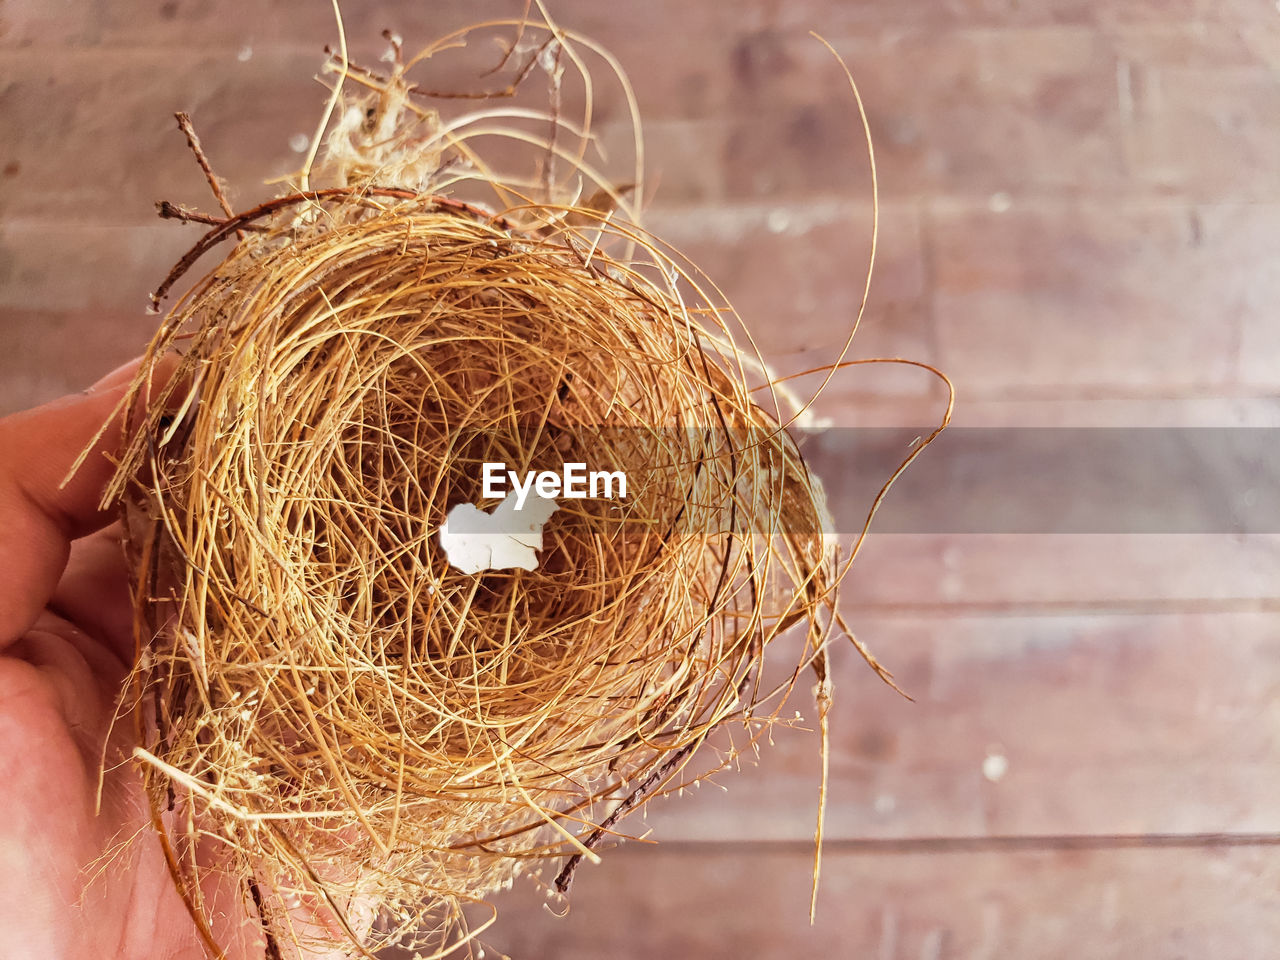 bird nest, hand, animal nest, nest, twig, branch, beginnings, nature, close-up, holding, bird, one person, day, outdoors, egg, focus on foreground, animal, animal themes, food, security, food and drink, protection, plant, fragility, animal egg